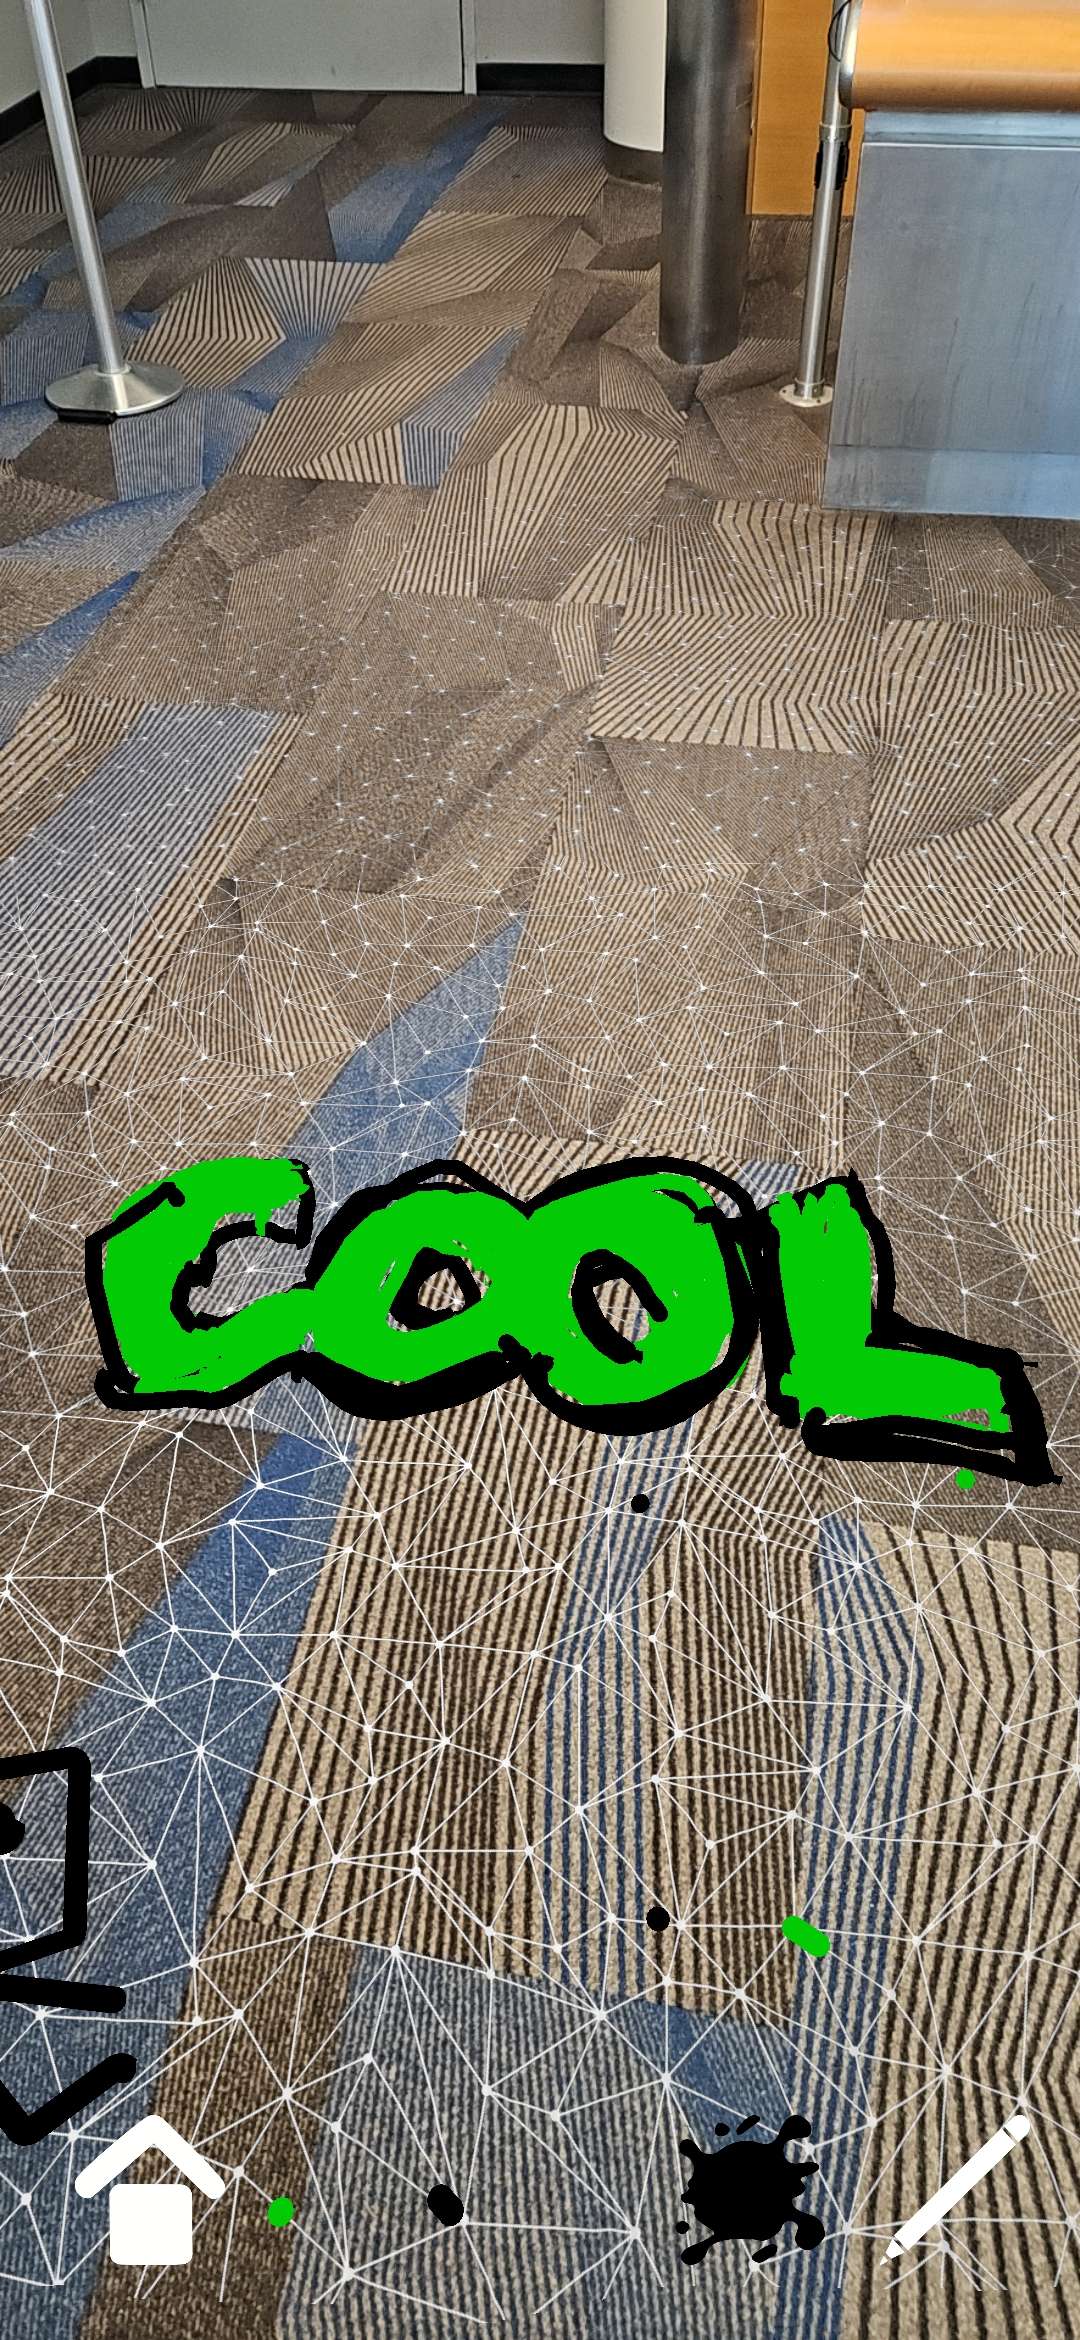 A green graffiti tag with black outlines, it reads: COOL